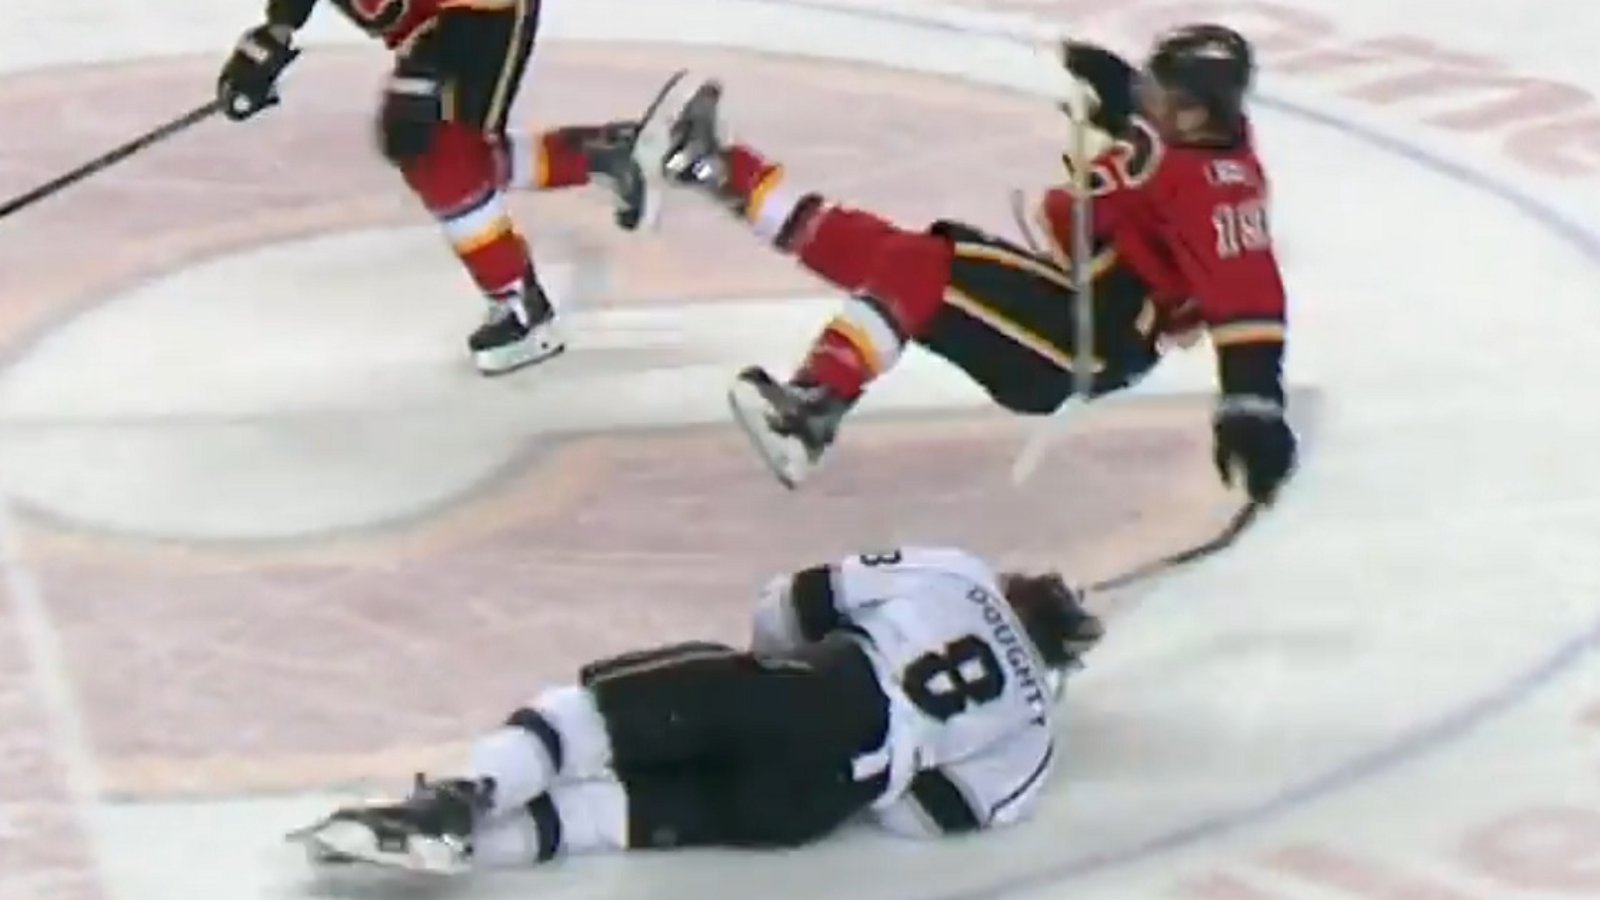 Drew Doughty just barely avoids getting destroyed by Matthew Tkachuk.